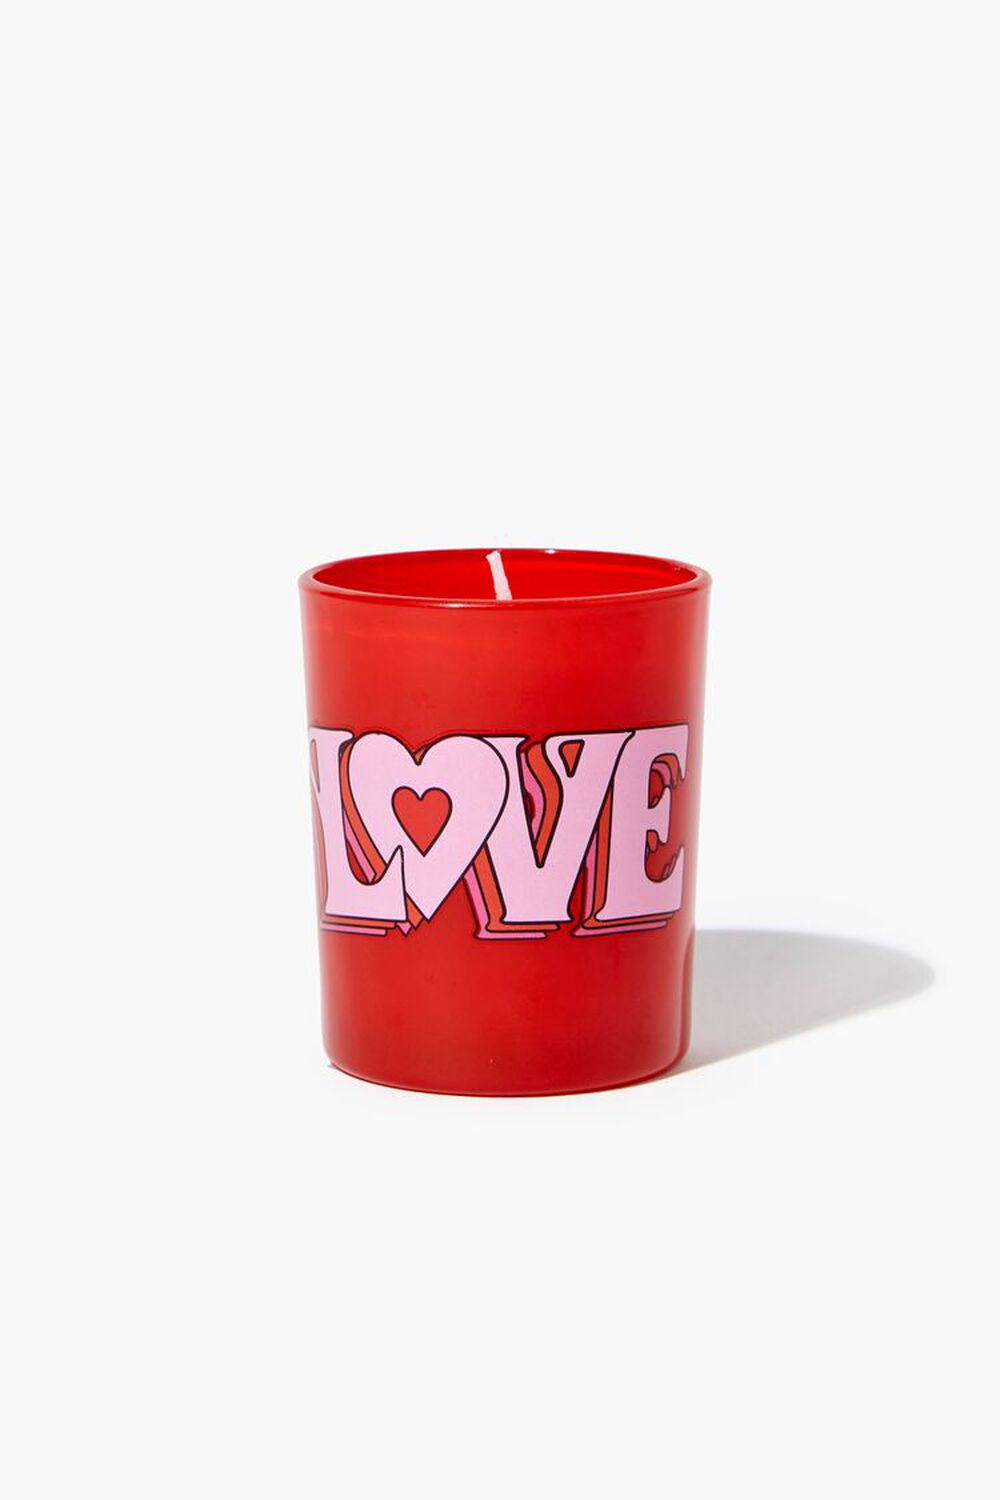 RED/PINK Love Vanilla Candle, image 1